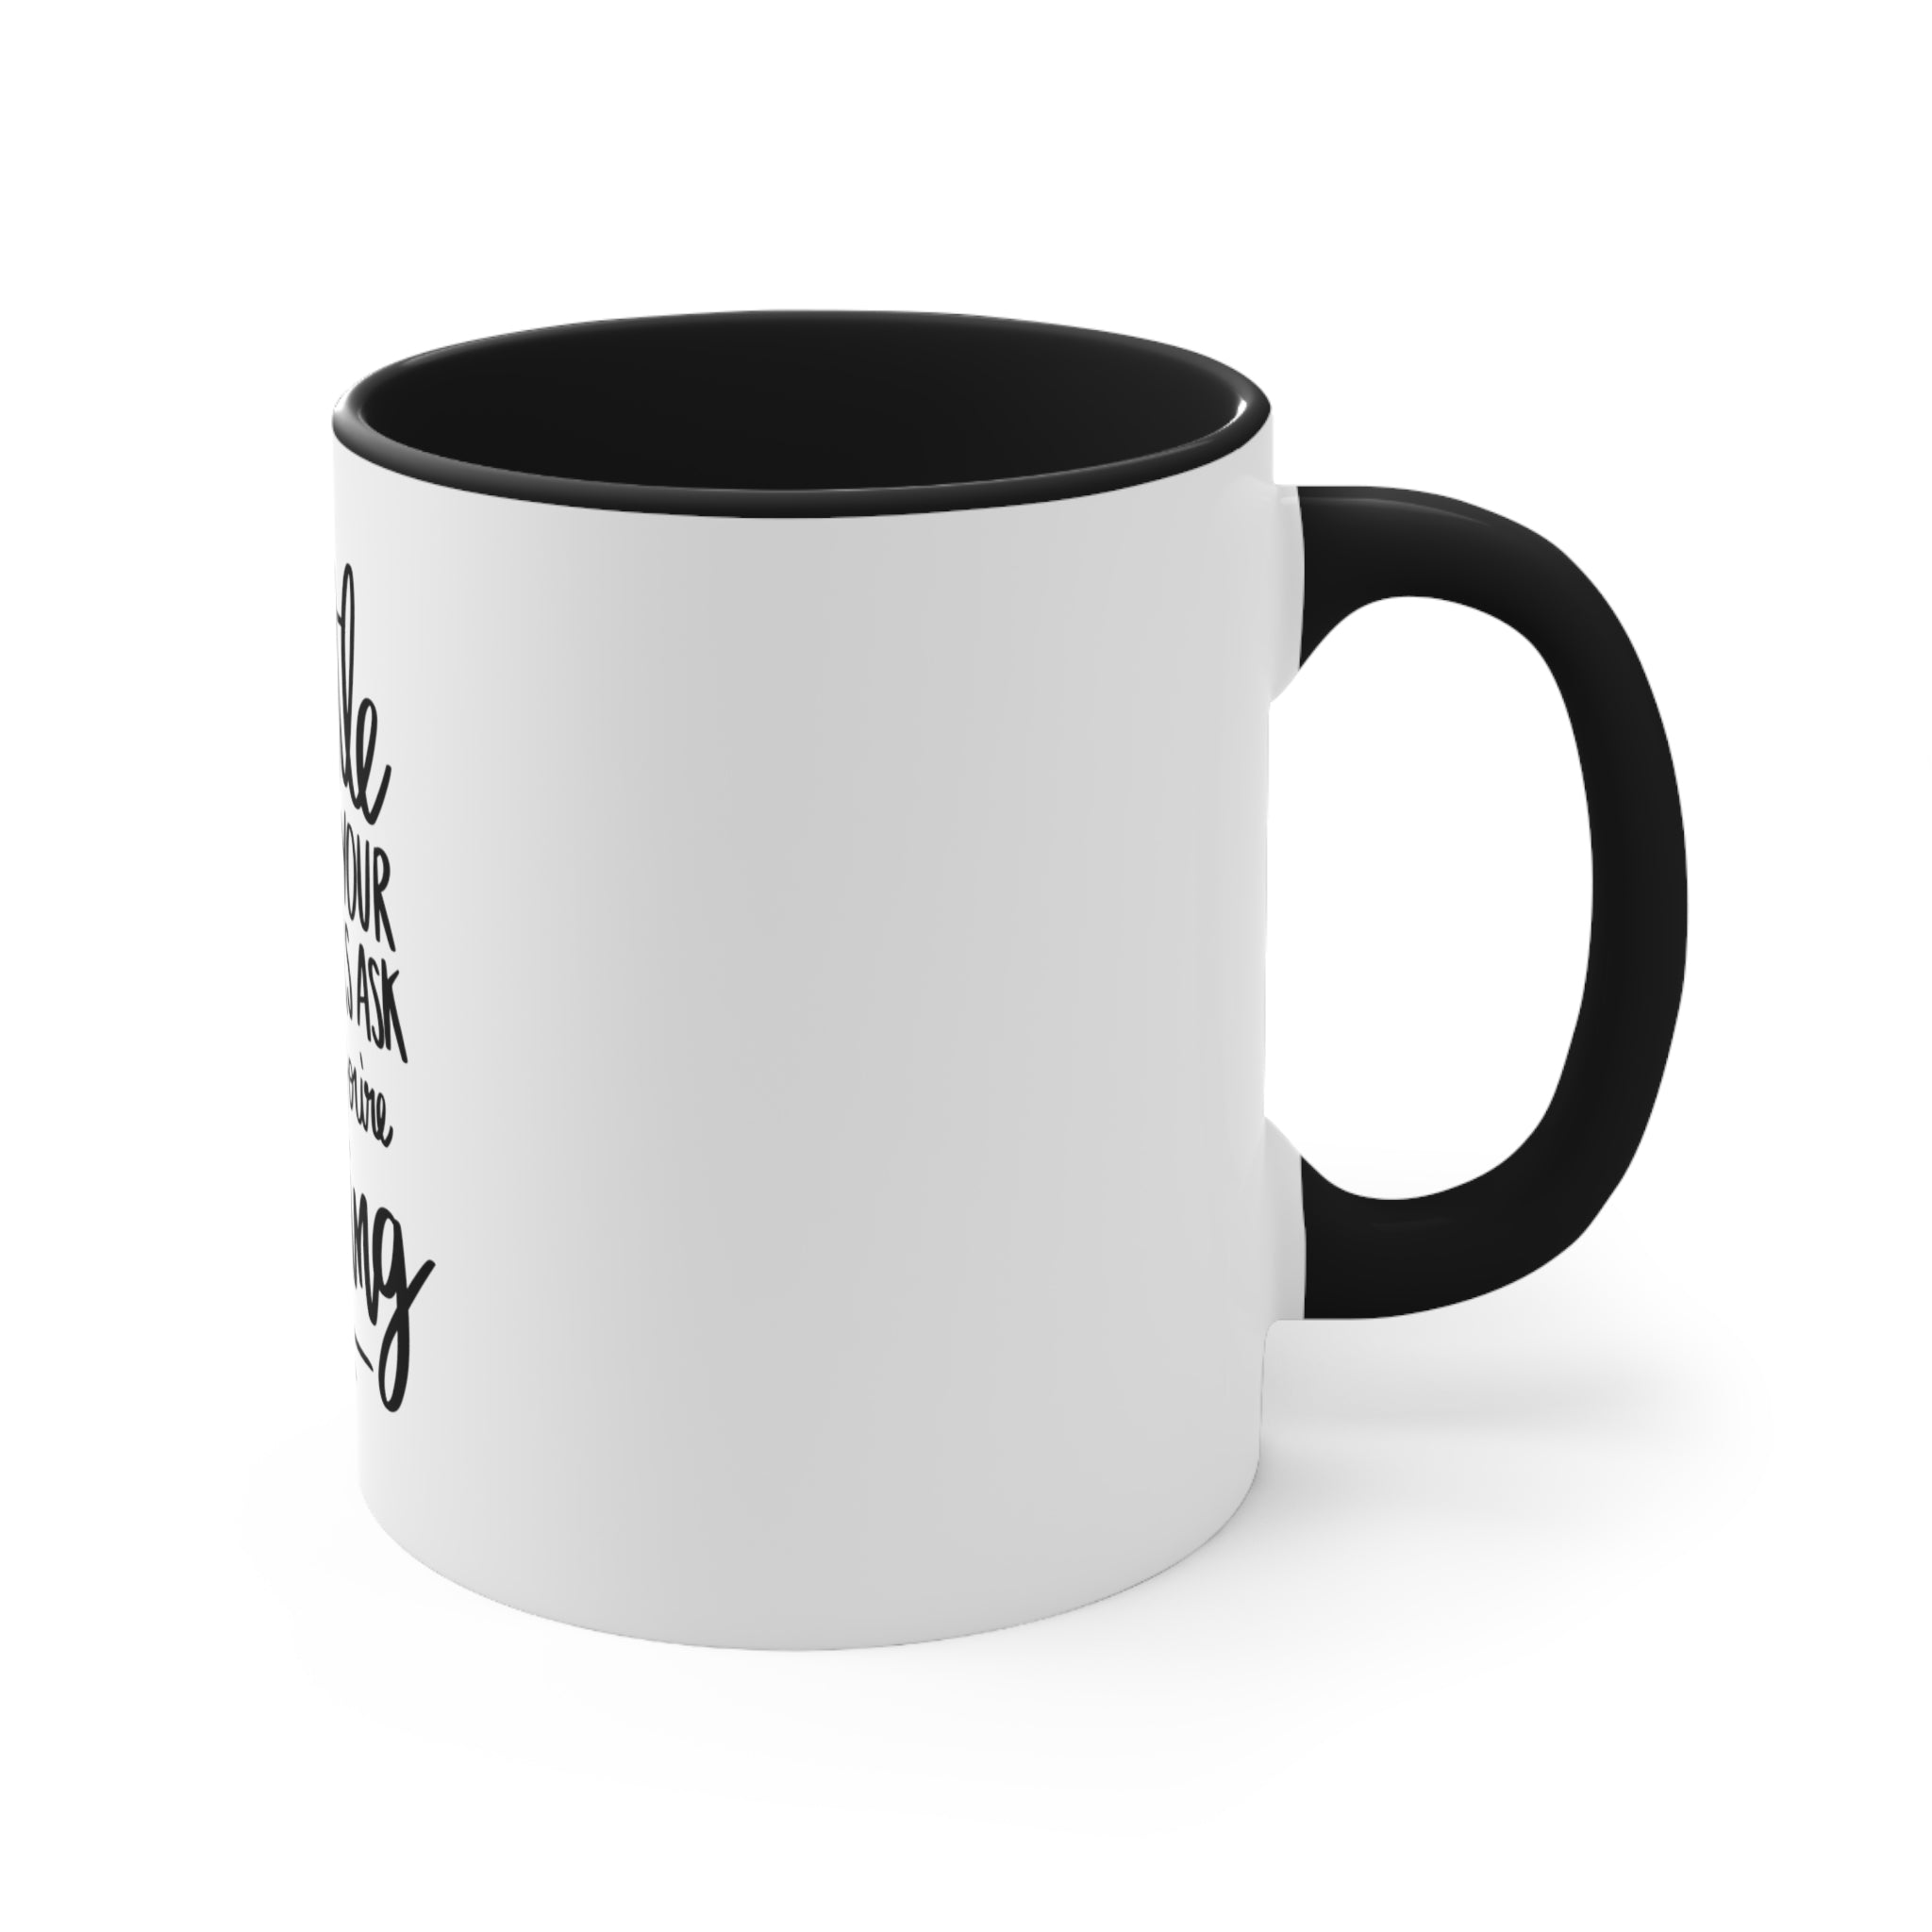 Hustle Until Your Haters Accent Coffee Mug, 11oz